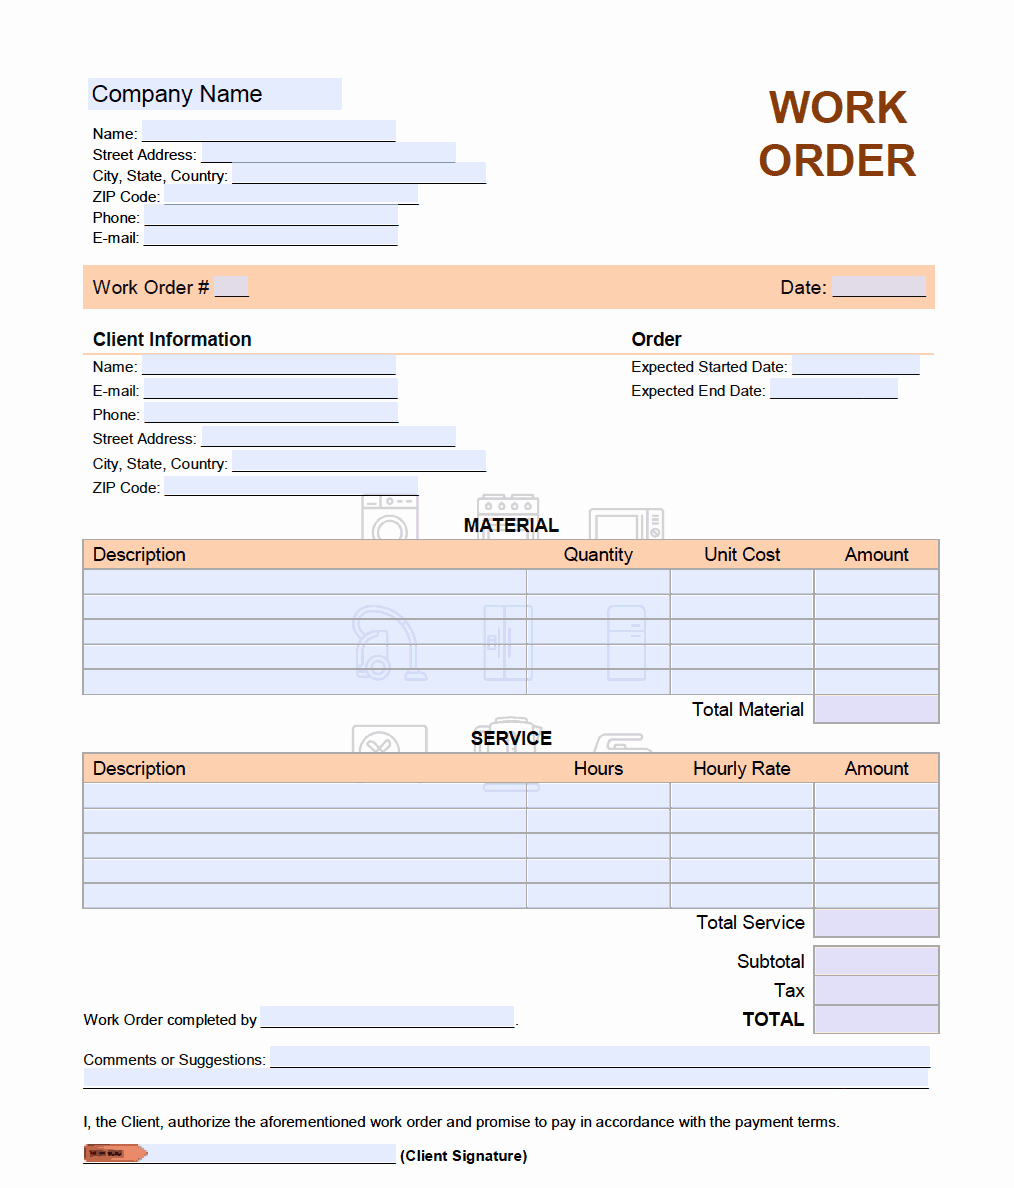 Appliance Repair Invoice Template New Appliance Repair Work order Template Lineinvoice